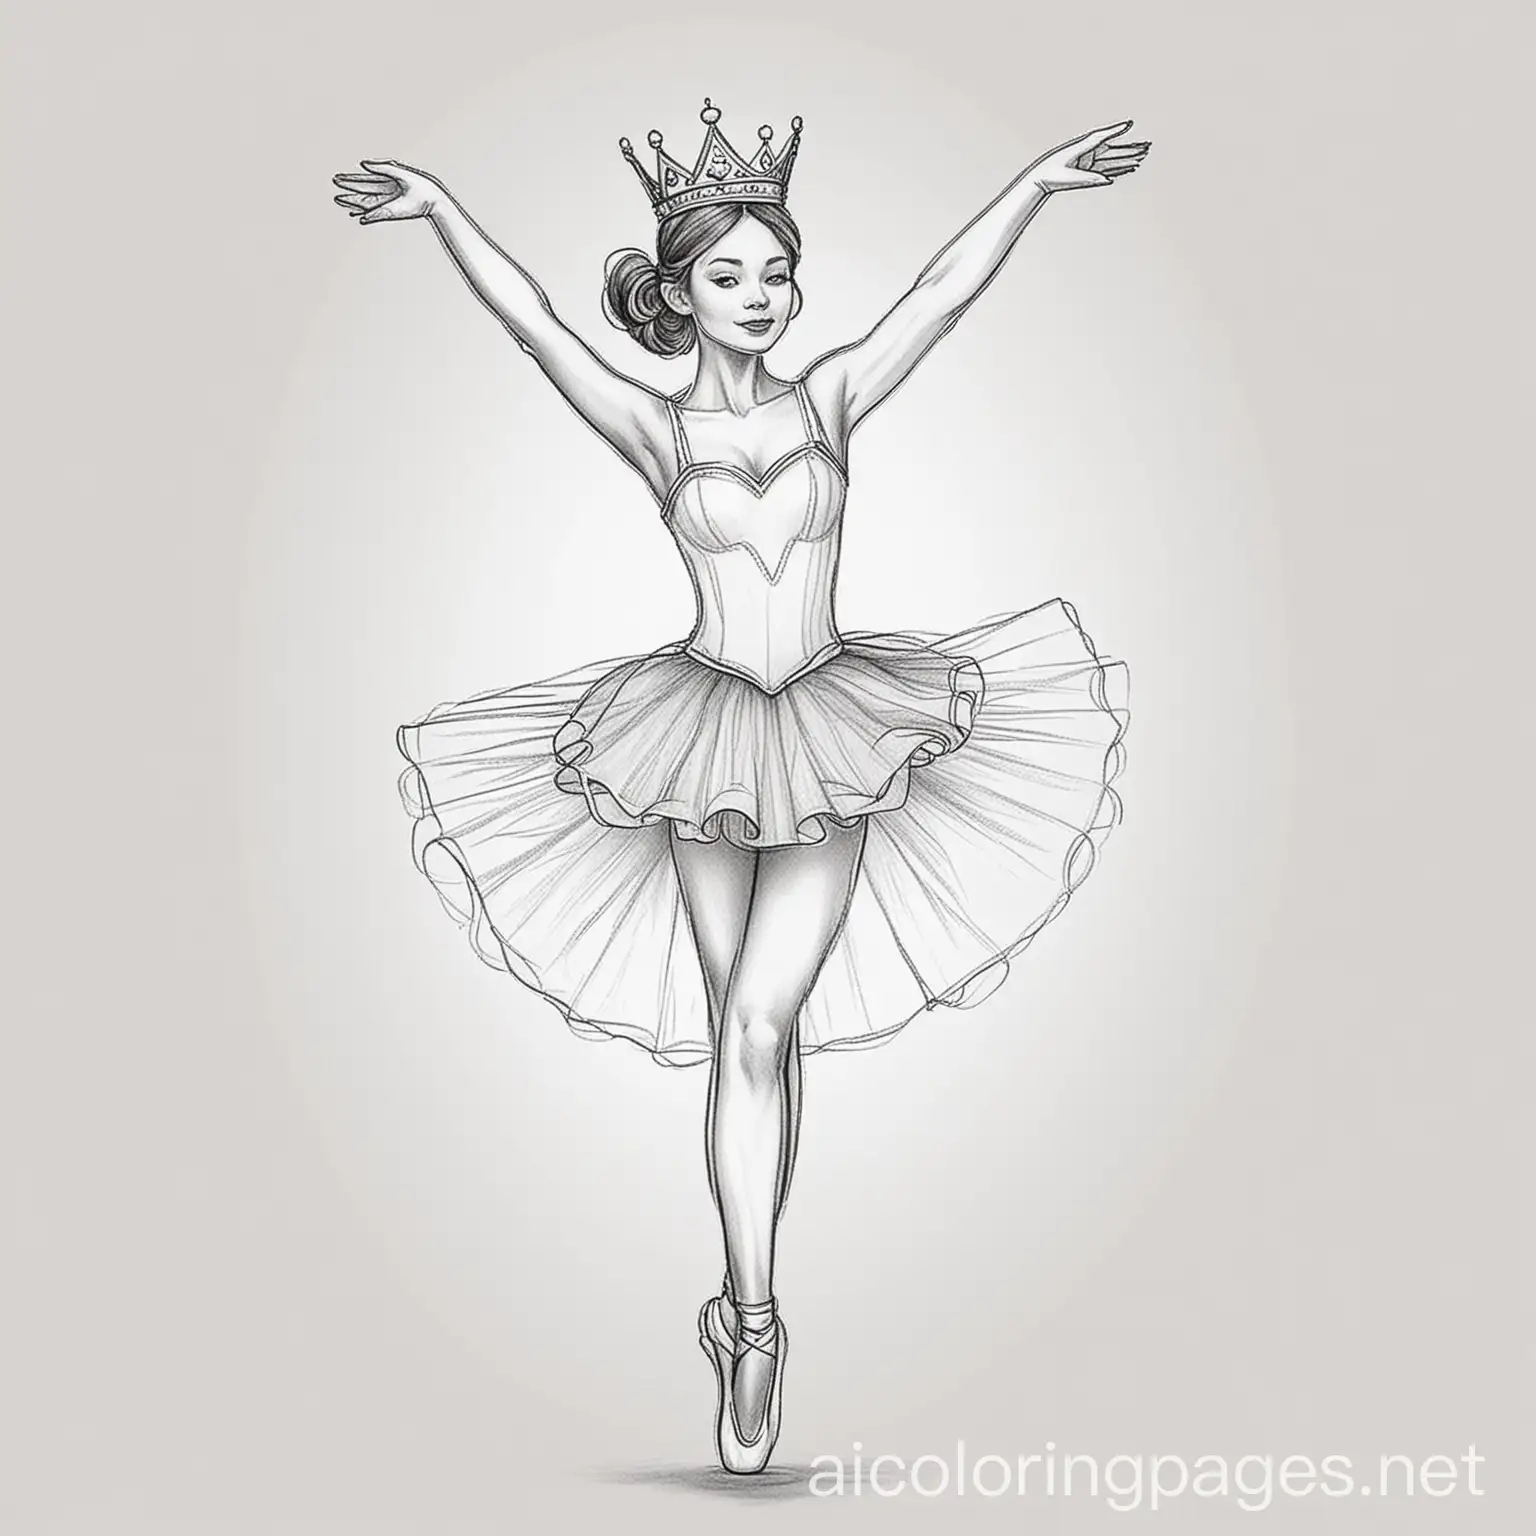 Ballerina-Tutu-Crown-Heart-Twirling-Jump-Coloring-Page